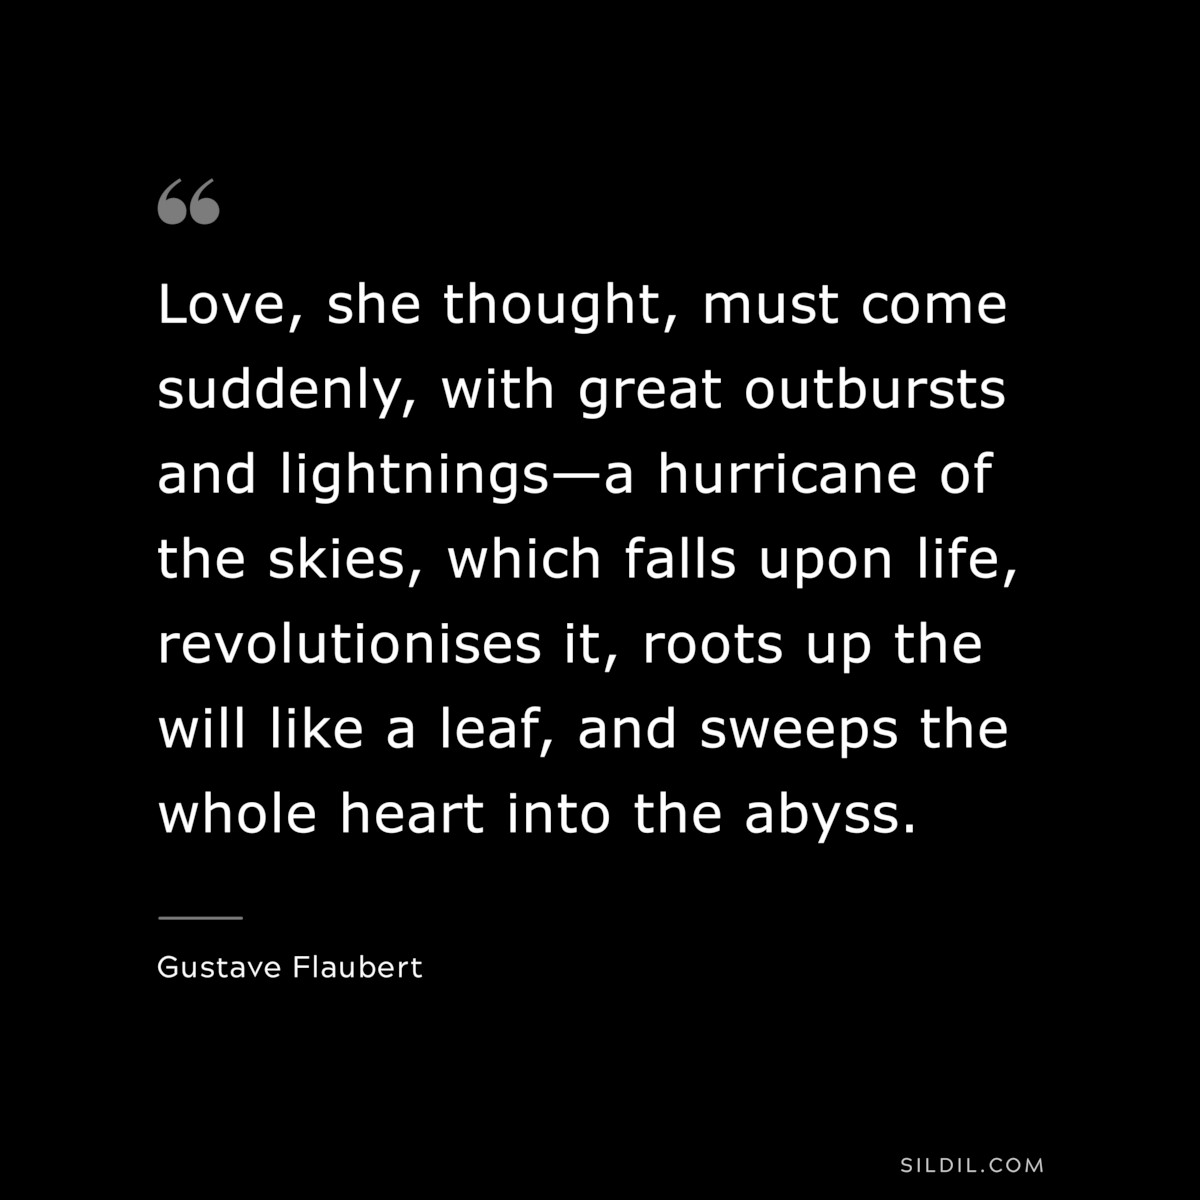 Love, she thought, must come suddenly, with great outbursts and lightnings—a hurricane of the skies, which falls upon life, revolutionises it, roots up the will like a leaf, and sweeps the whole heart into the abyss. ― Gustave Flaubert